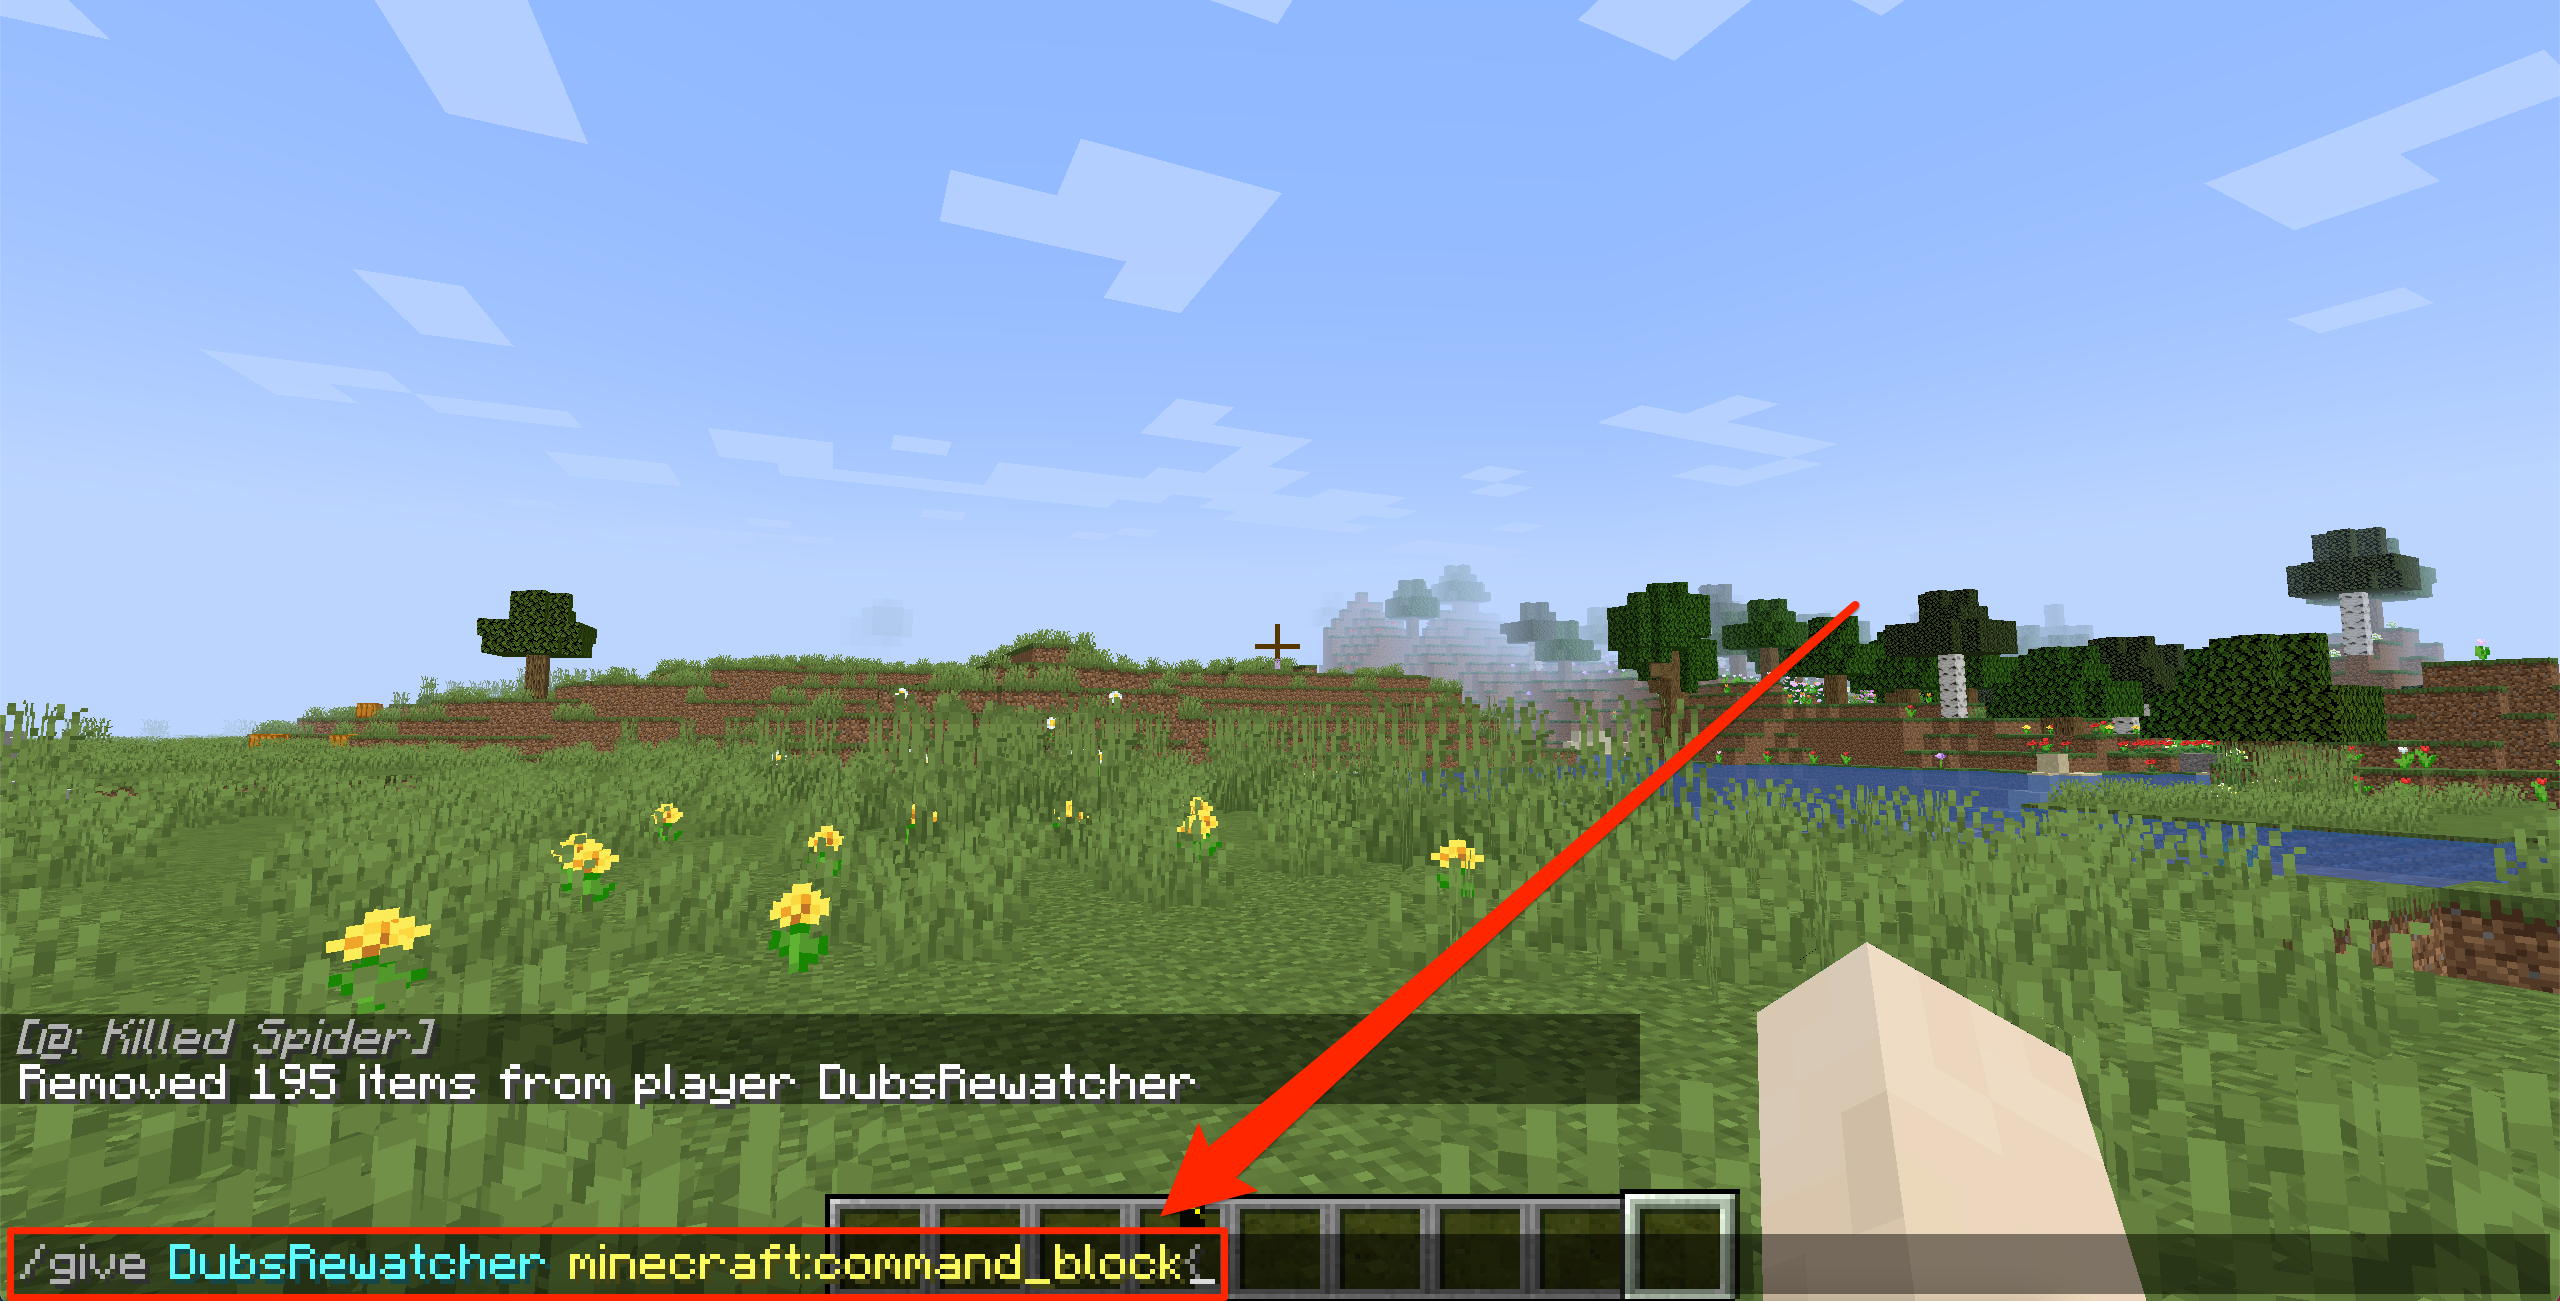 A Minecraft screenshot where the player has entered a command into the chat box.